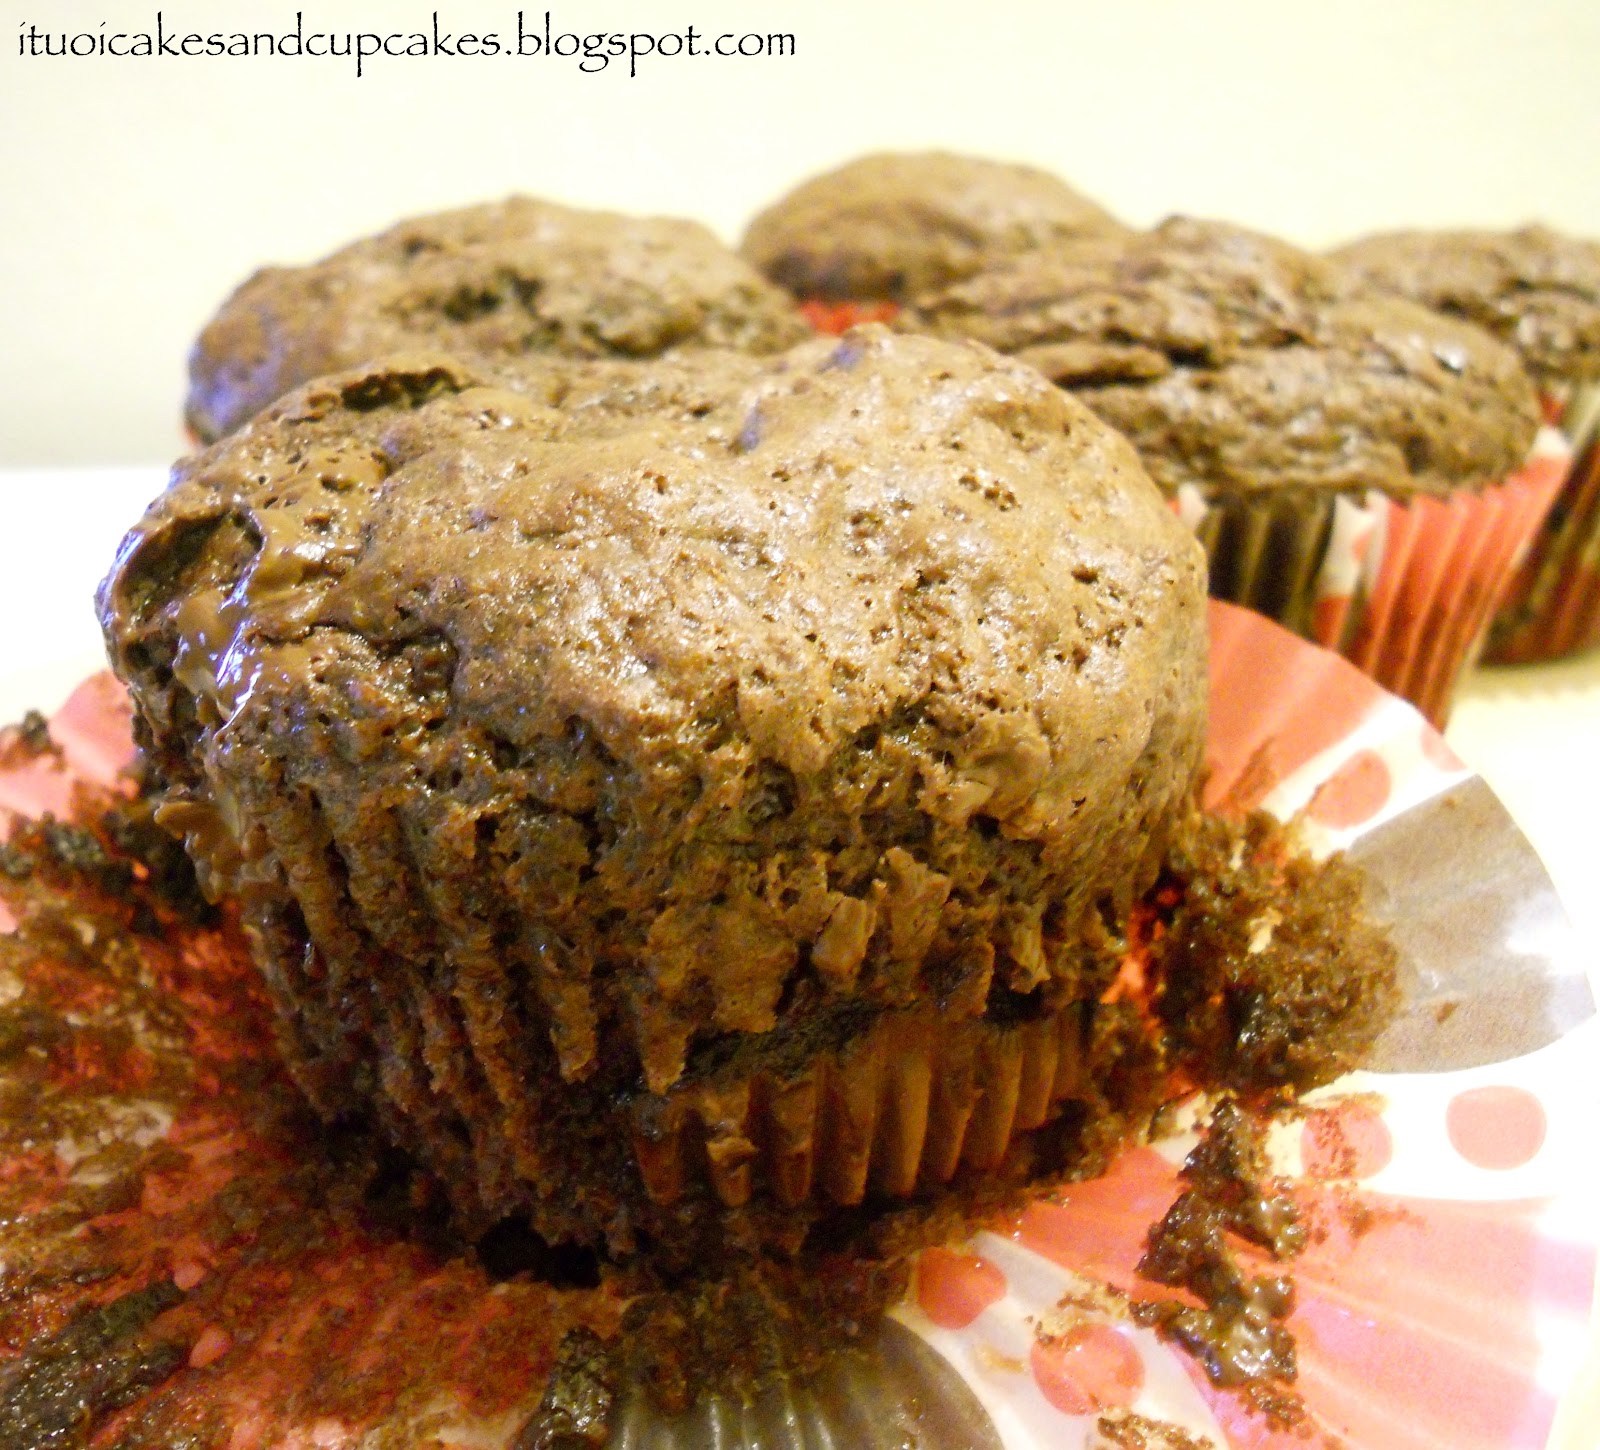 Cakes and Cupcakes: Muffin Double Chocolate